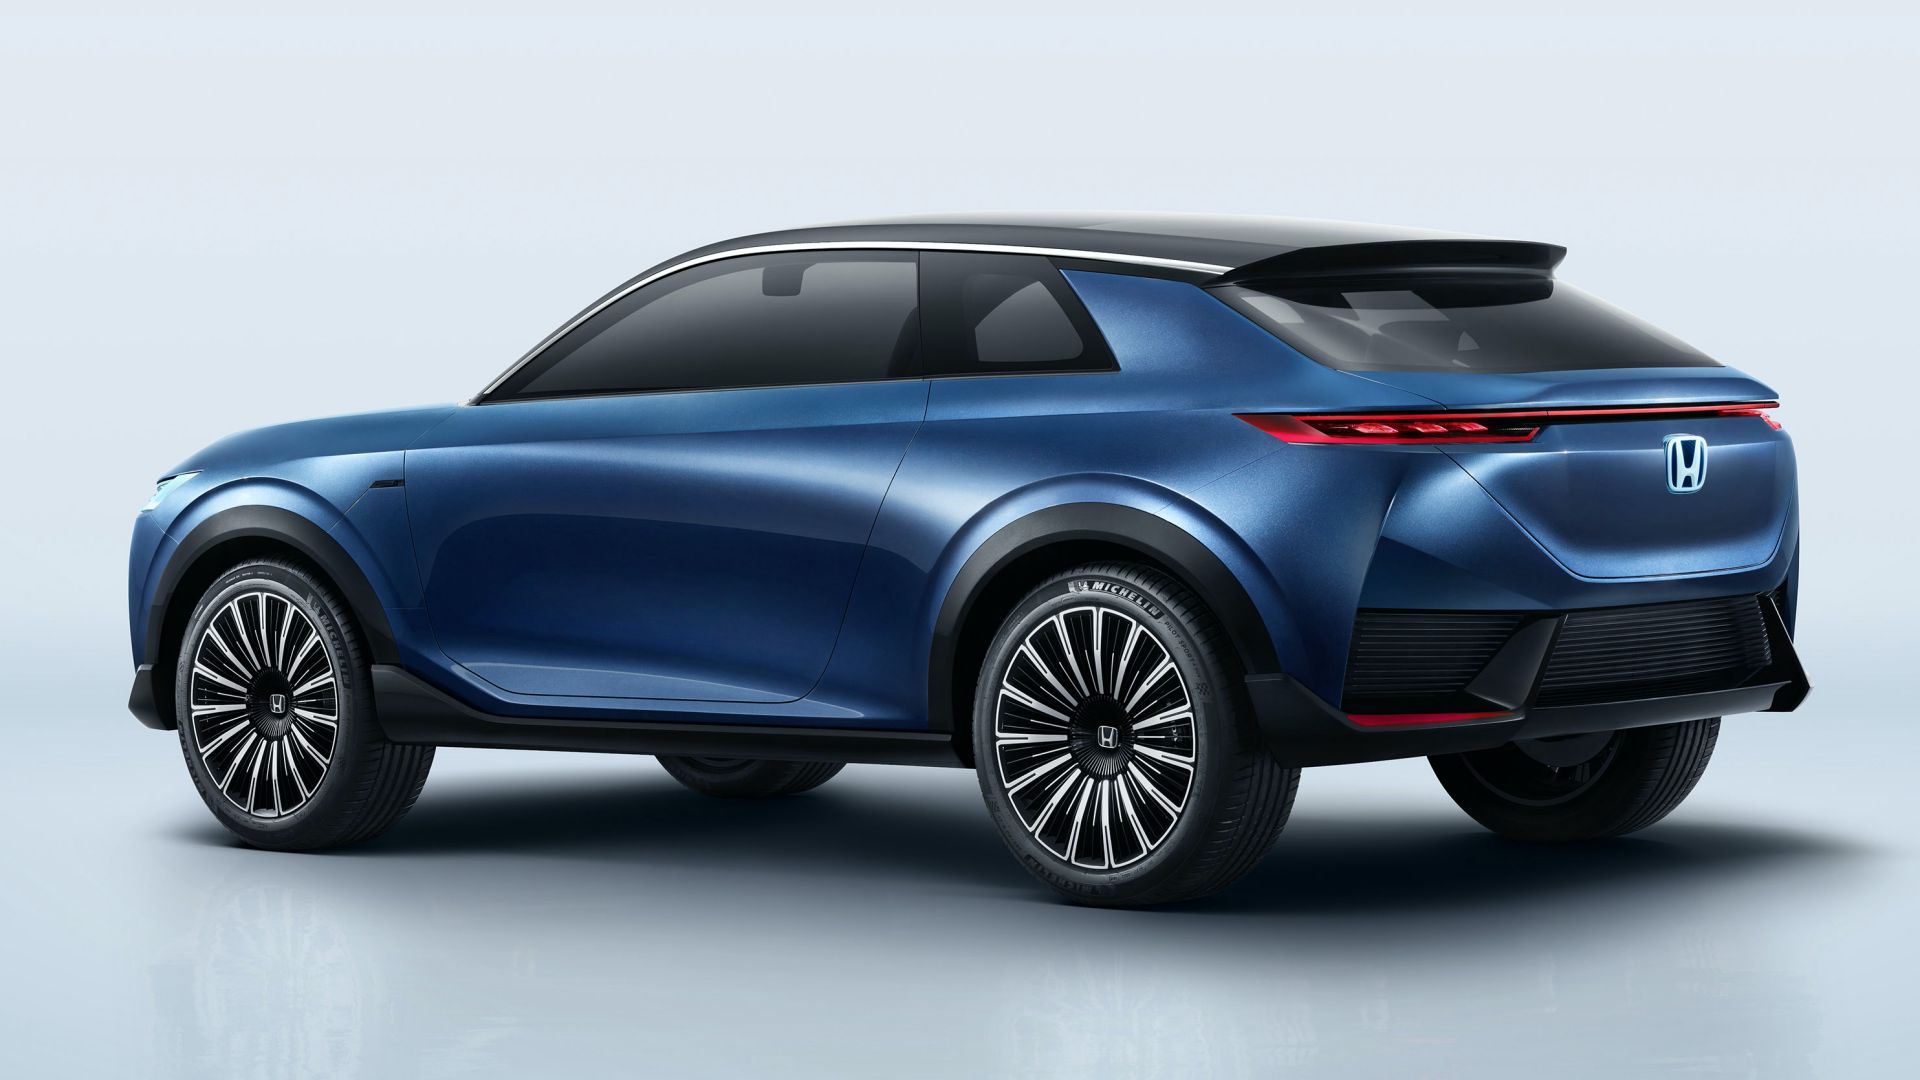 Honda SUV e:concept Is An Enticing Preview Of The Brand’s First EV For